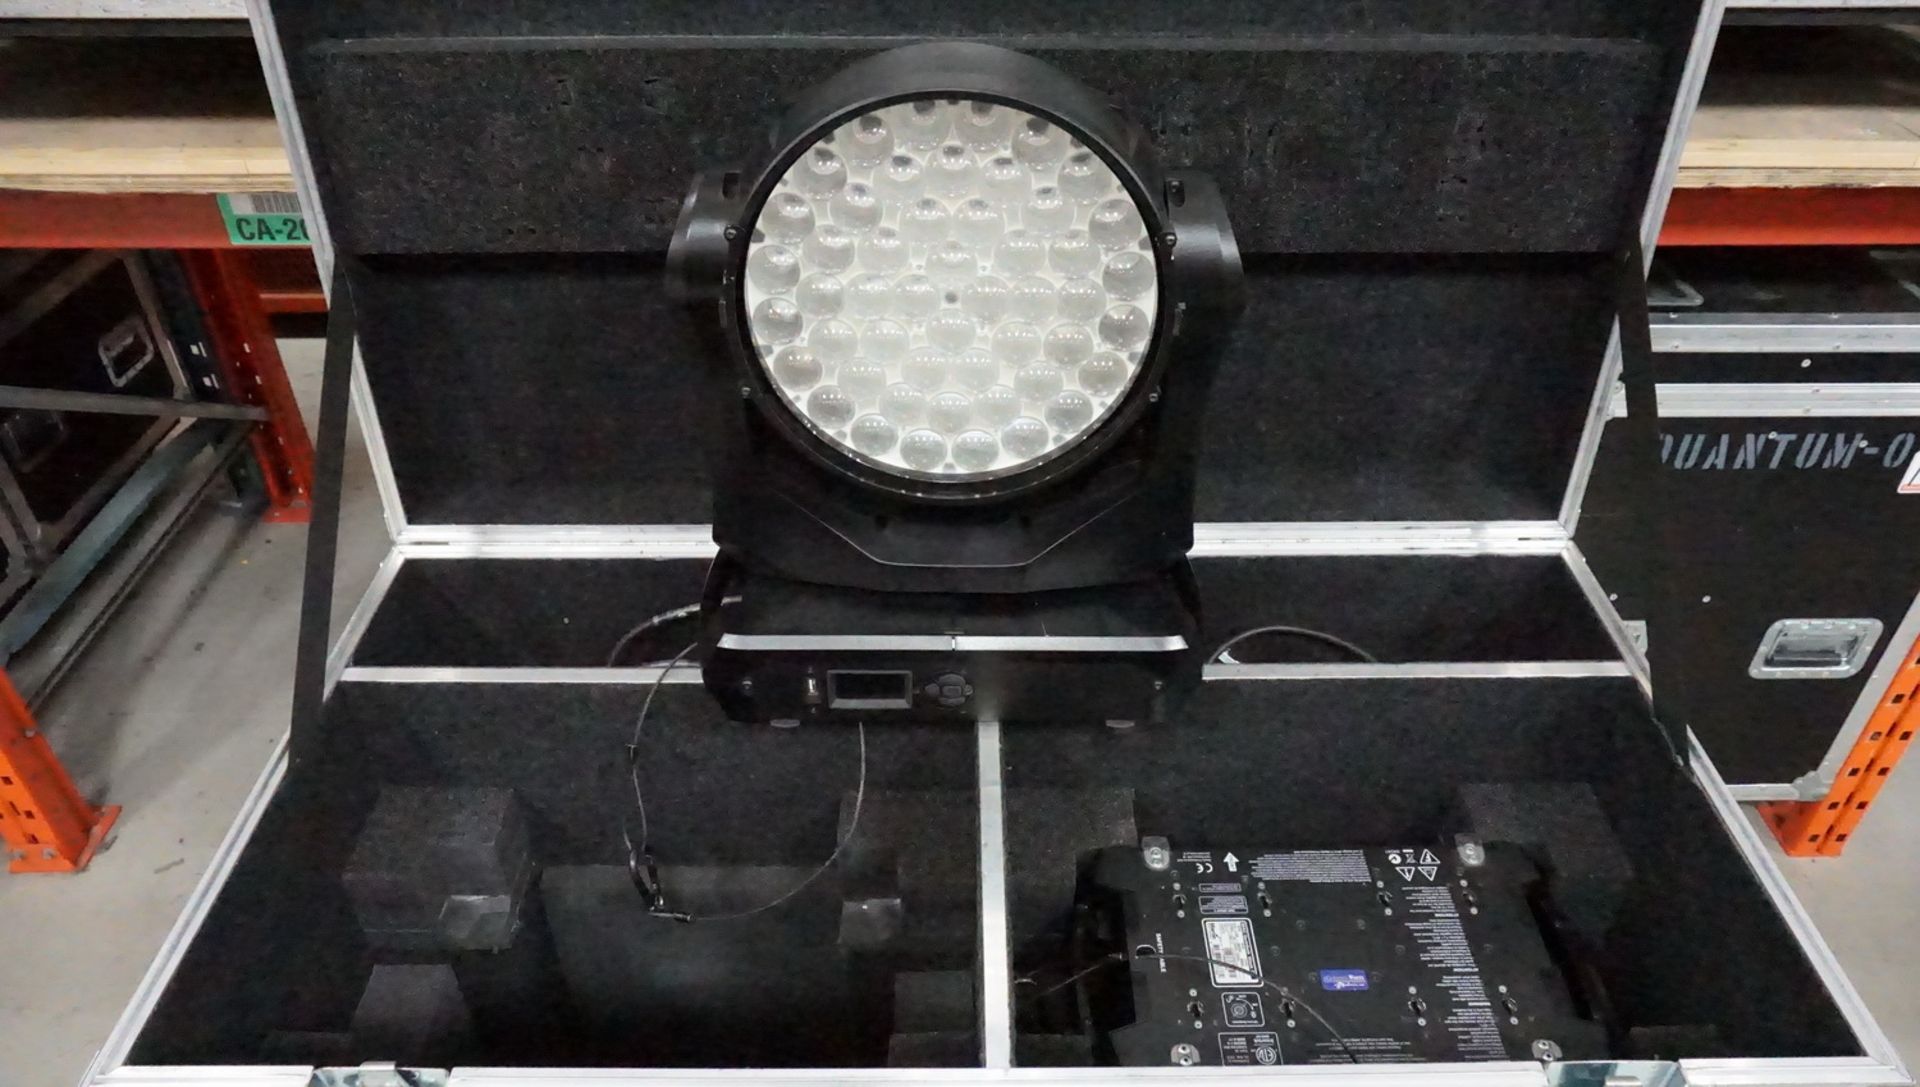 UNITS - MARTIN QUANTUM WASH LED RGBW FIXTURES W/CLAMPS, SAFETY & CASE